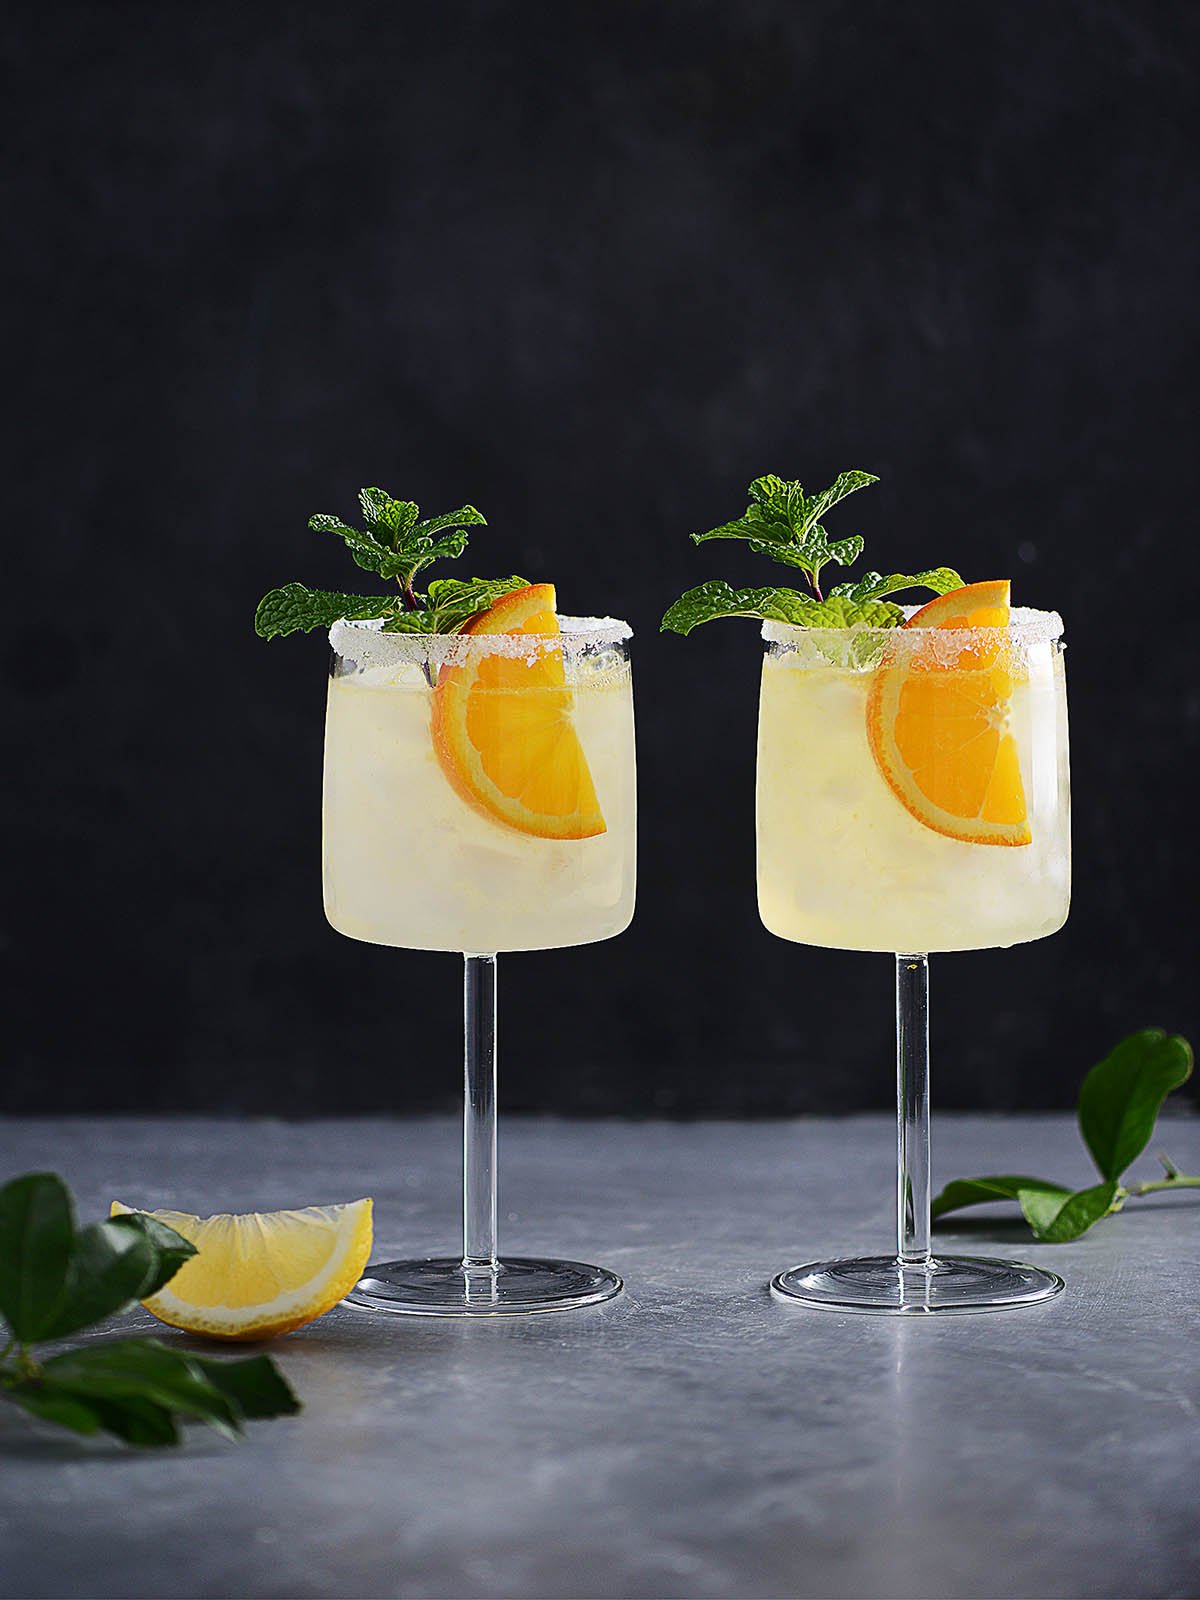 A cocktail glass with vodka collins garnished with an orange slice and a mint sprig.